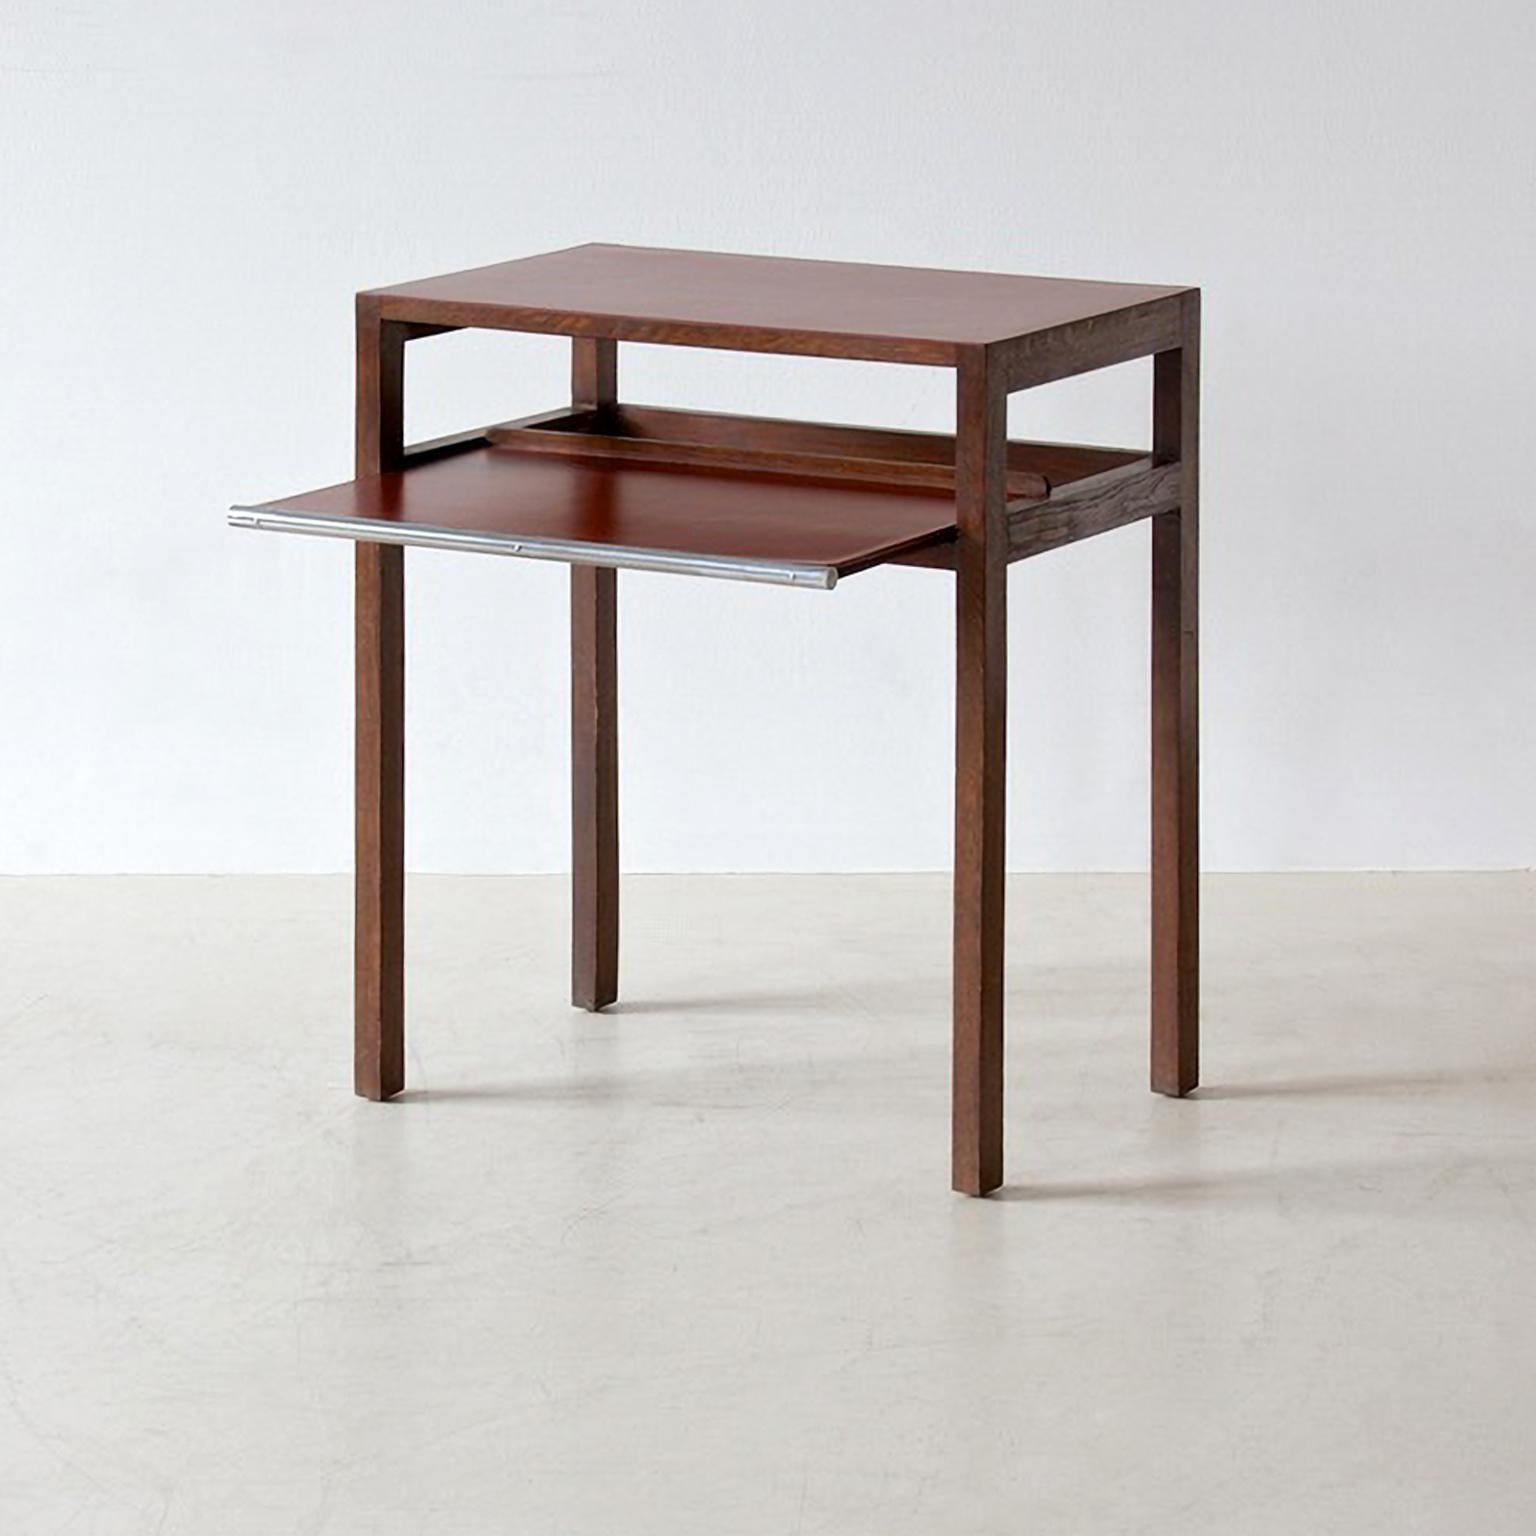 Modernist end table model H 174 designed by Jindrich Halabala and manufactured by UP Závody, Brno, circa 1930. The table is made of stained oak and features an extendable shelf with a chromed tubular steel handle. The table top and the pull-out